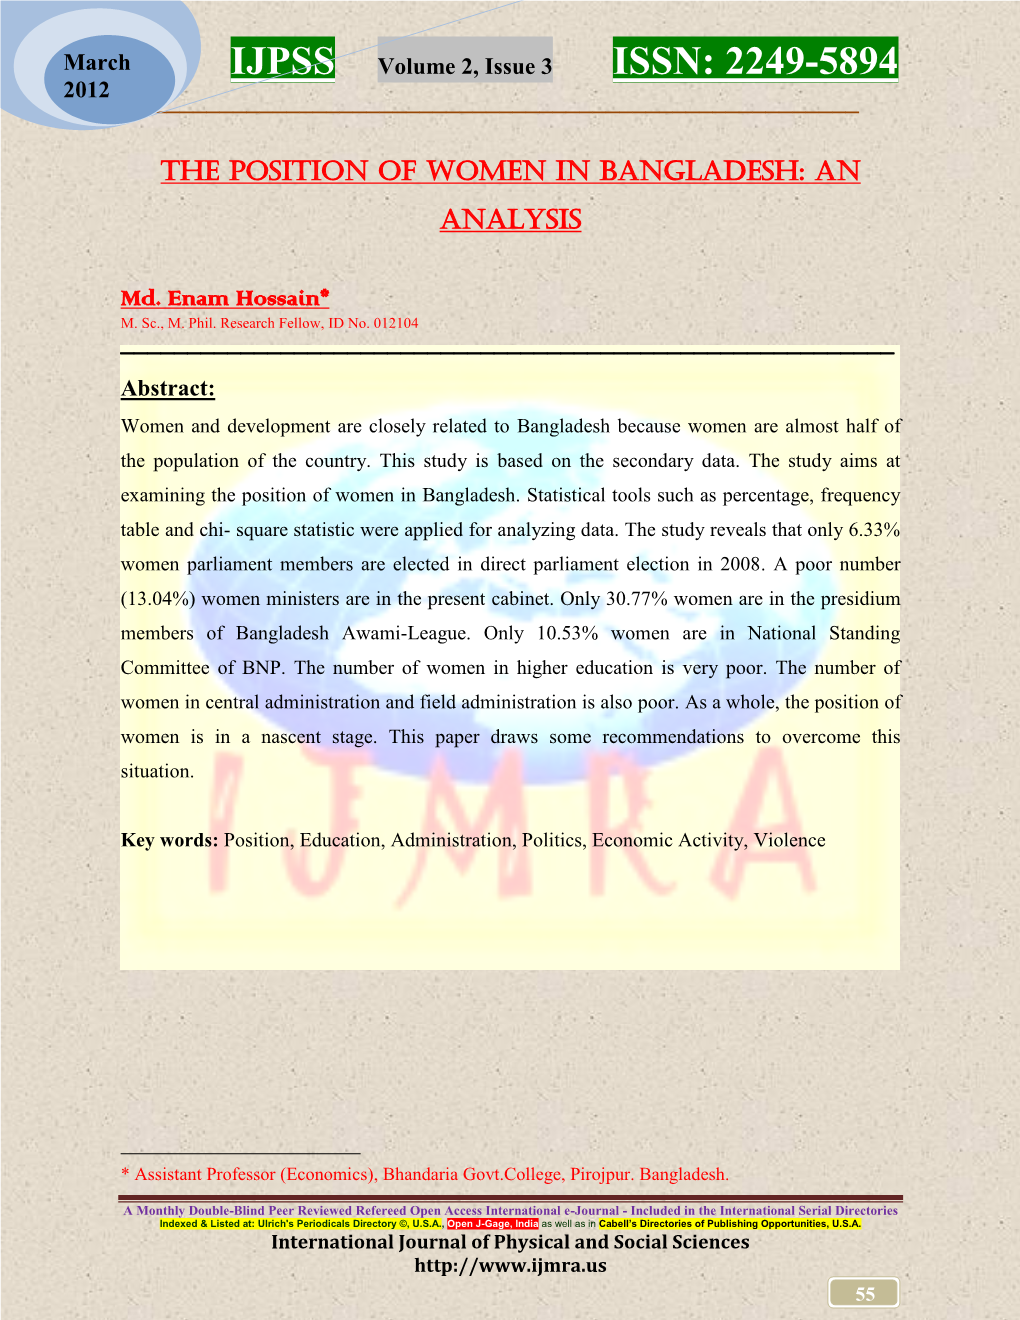 The Position of Women in Bangladesh: an Analysis